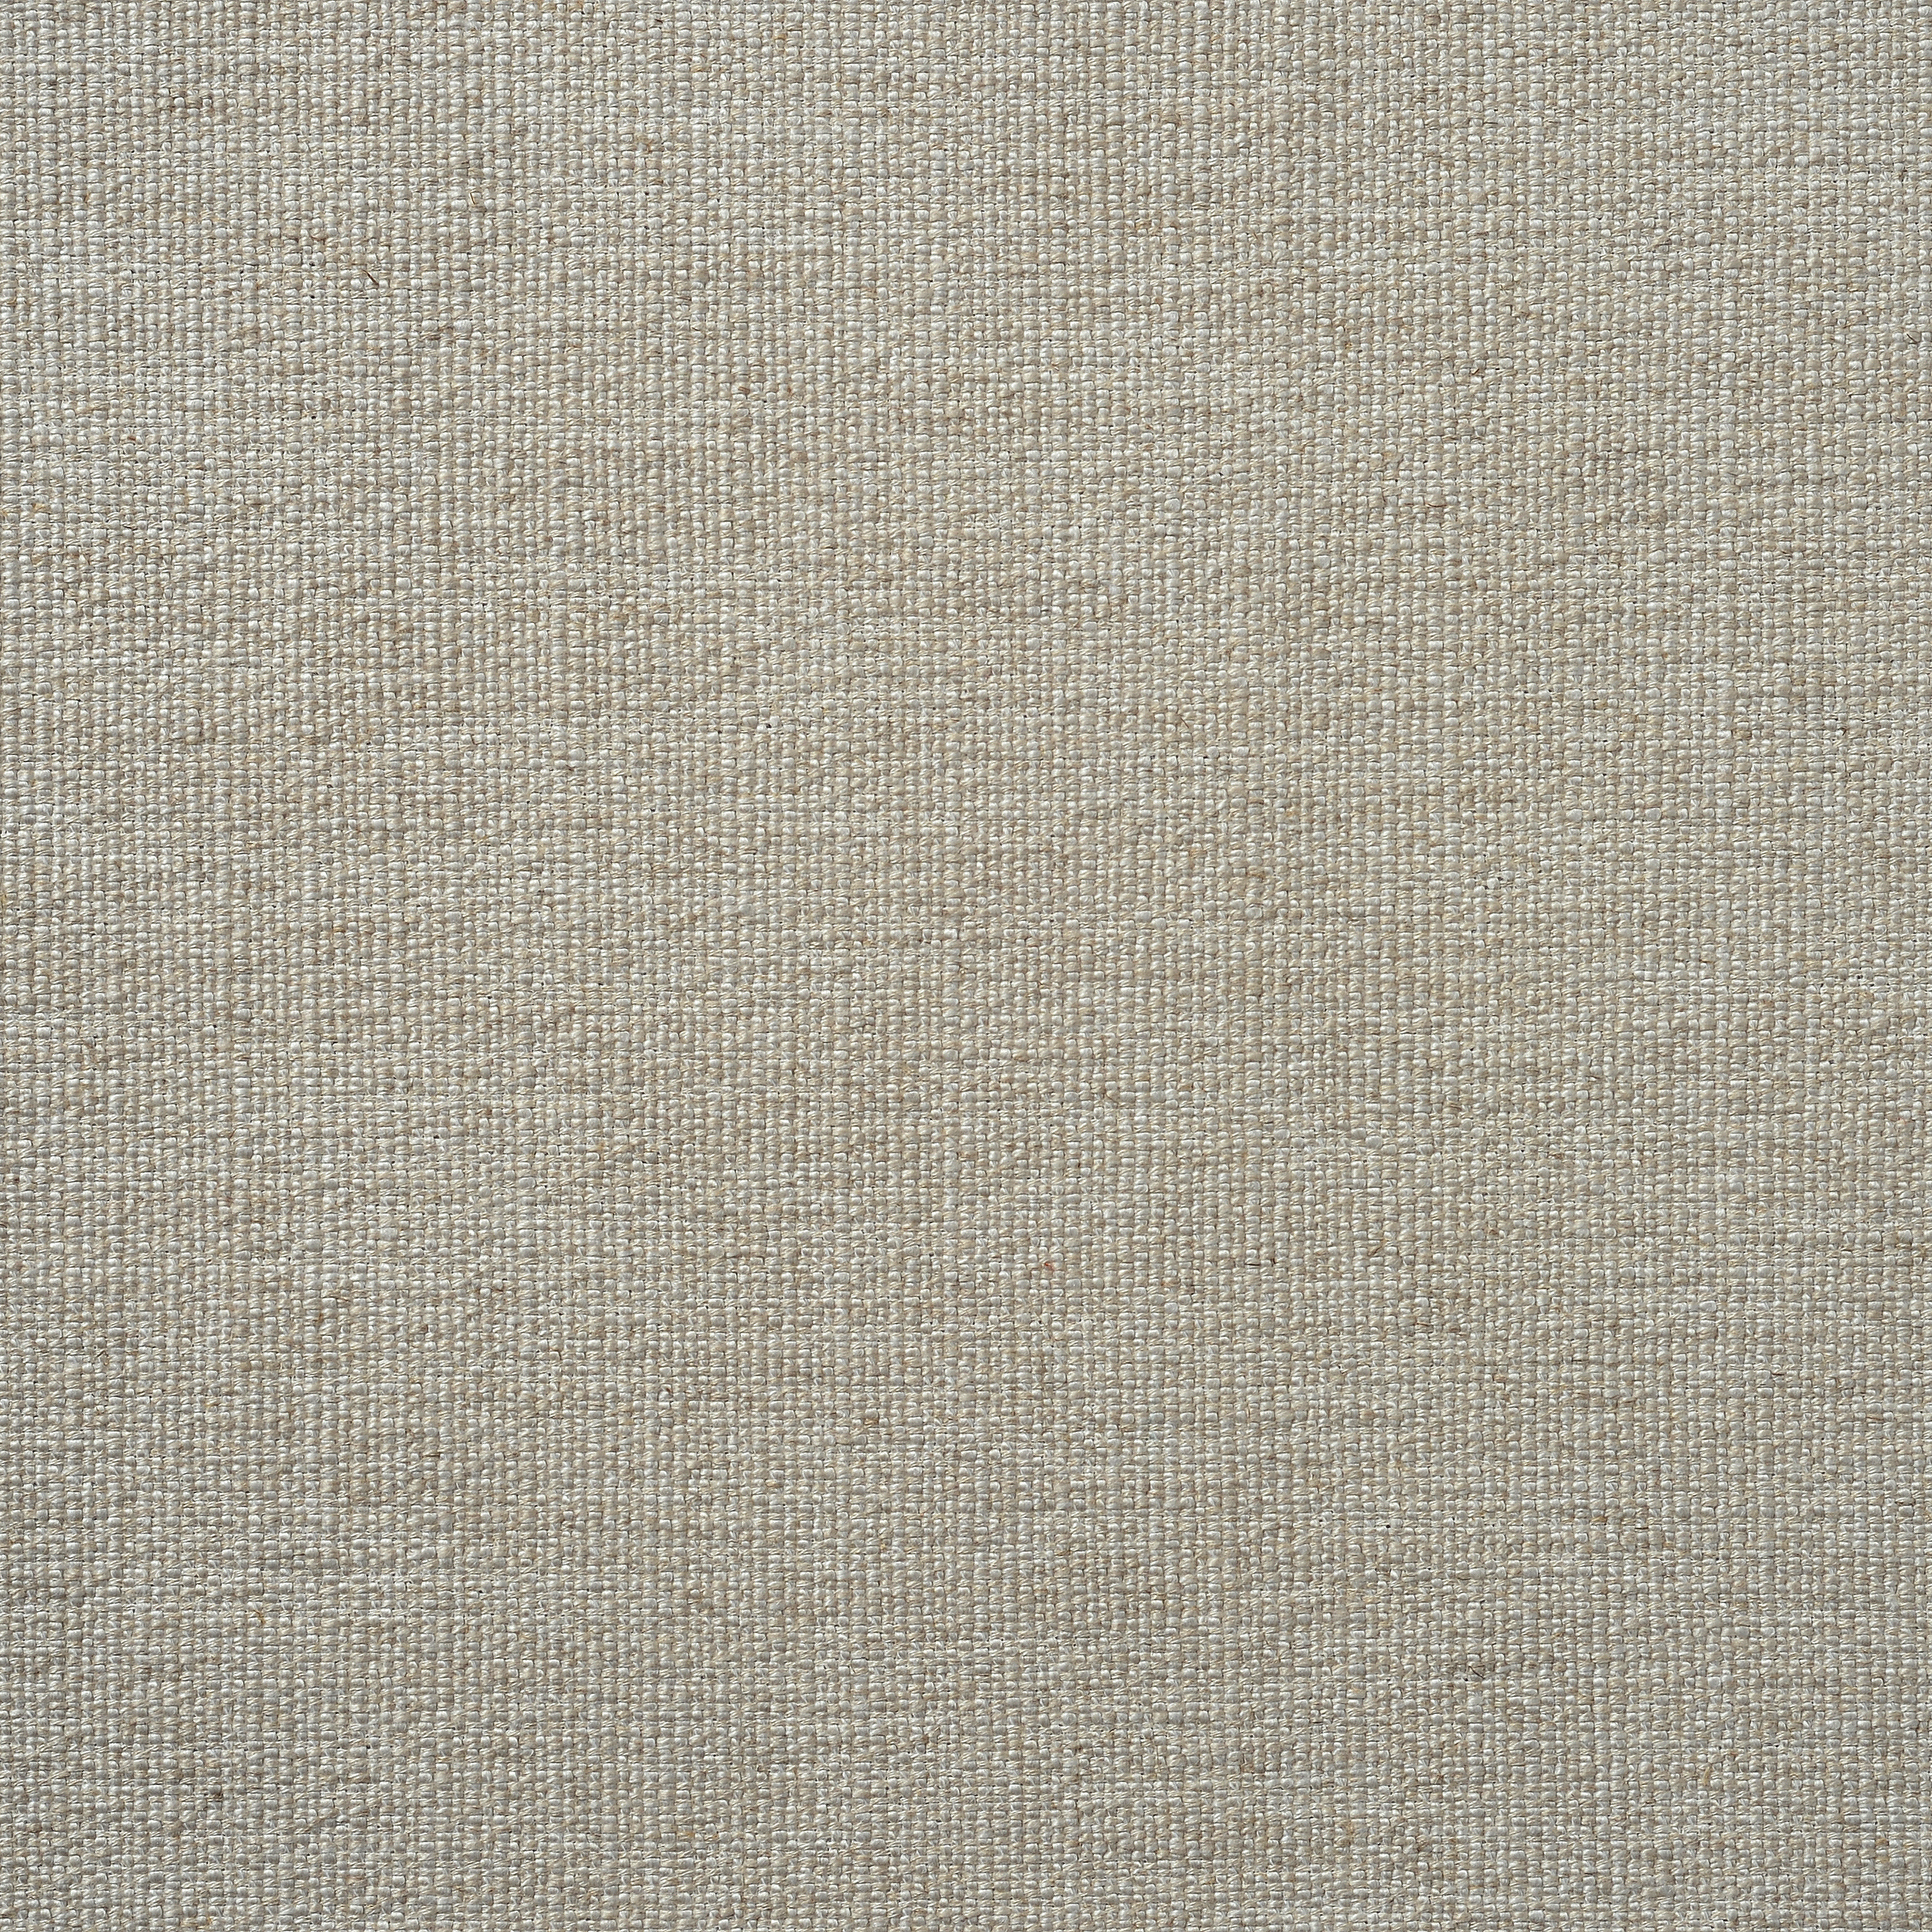 Ashbee Rustic Weave - Natural